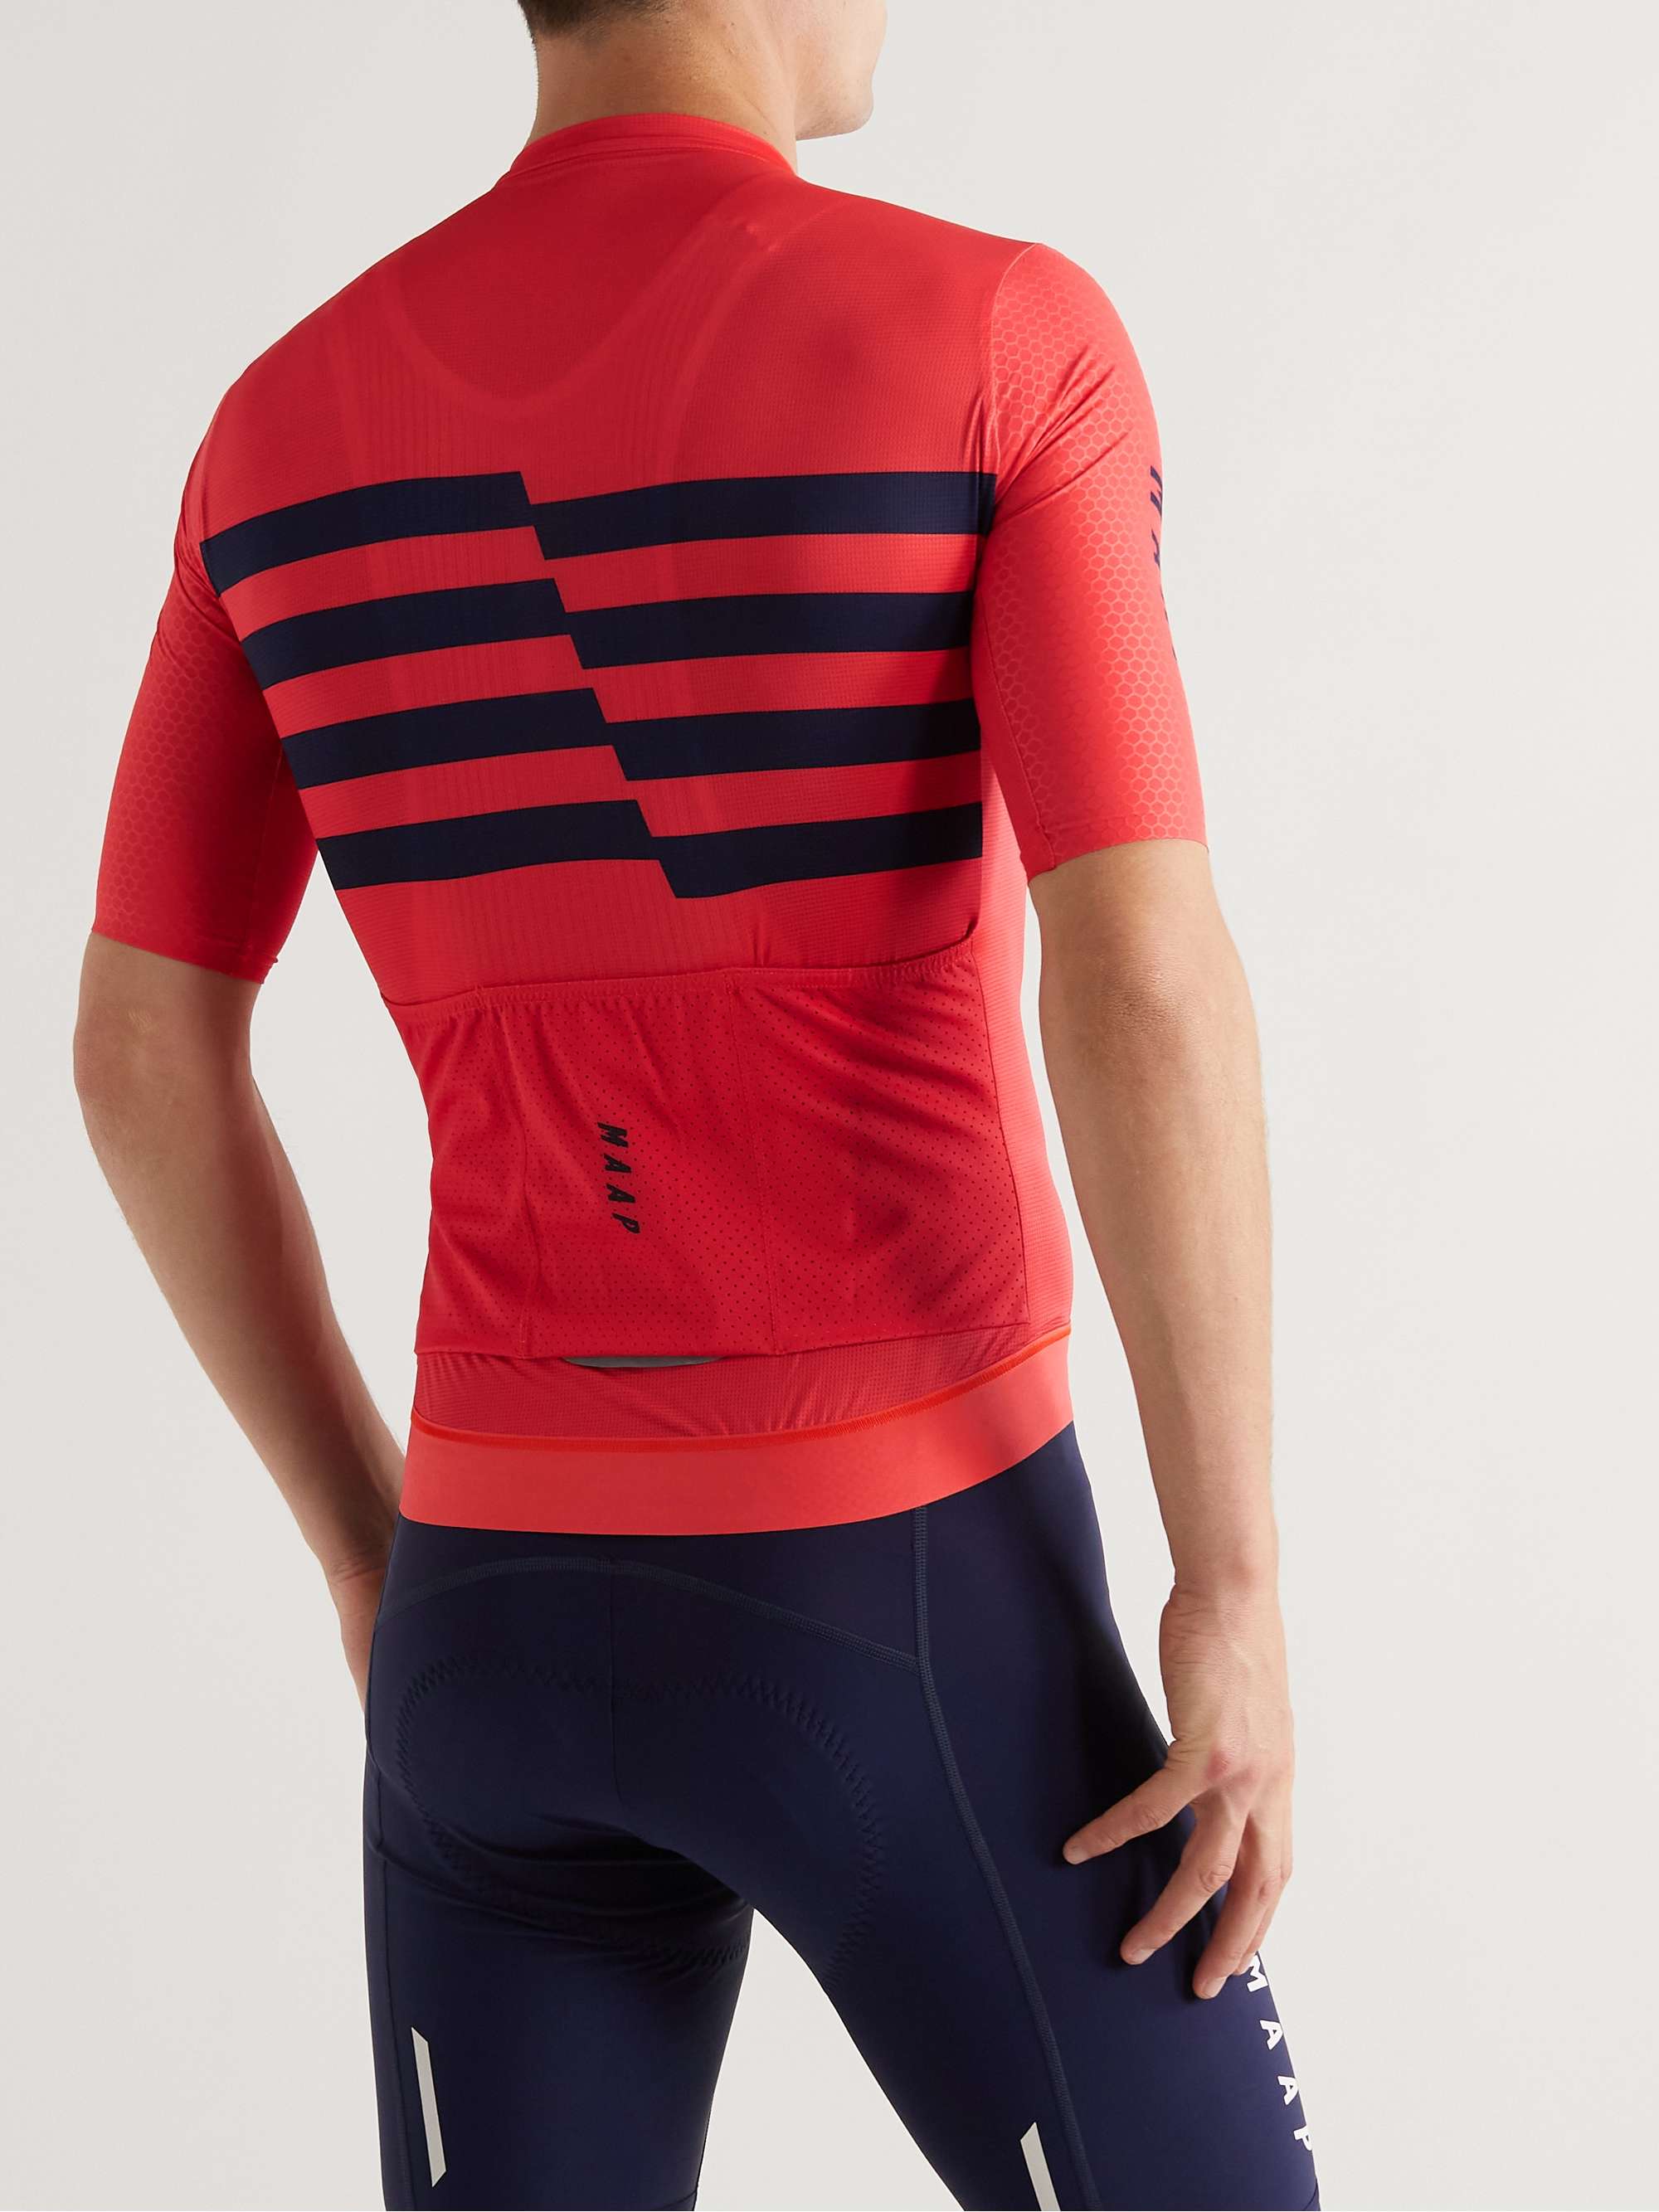 MAAP Emblem Pro Hex Recycled Stretch-Mesh Cycling Jersey